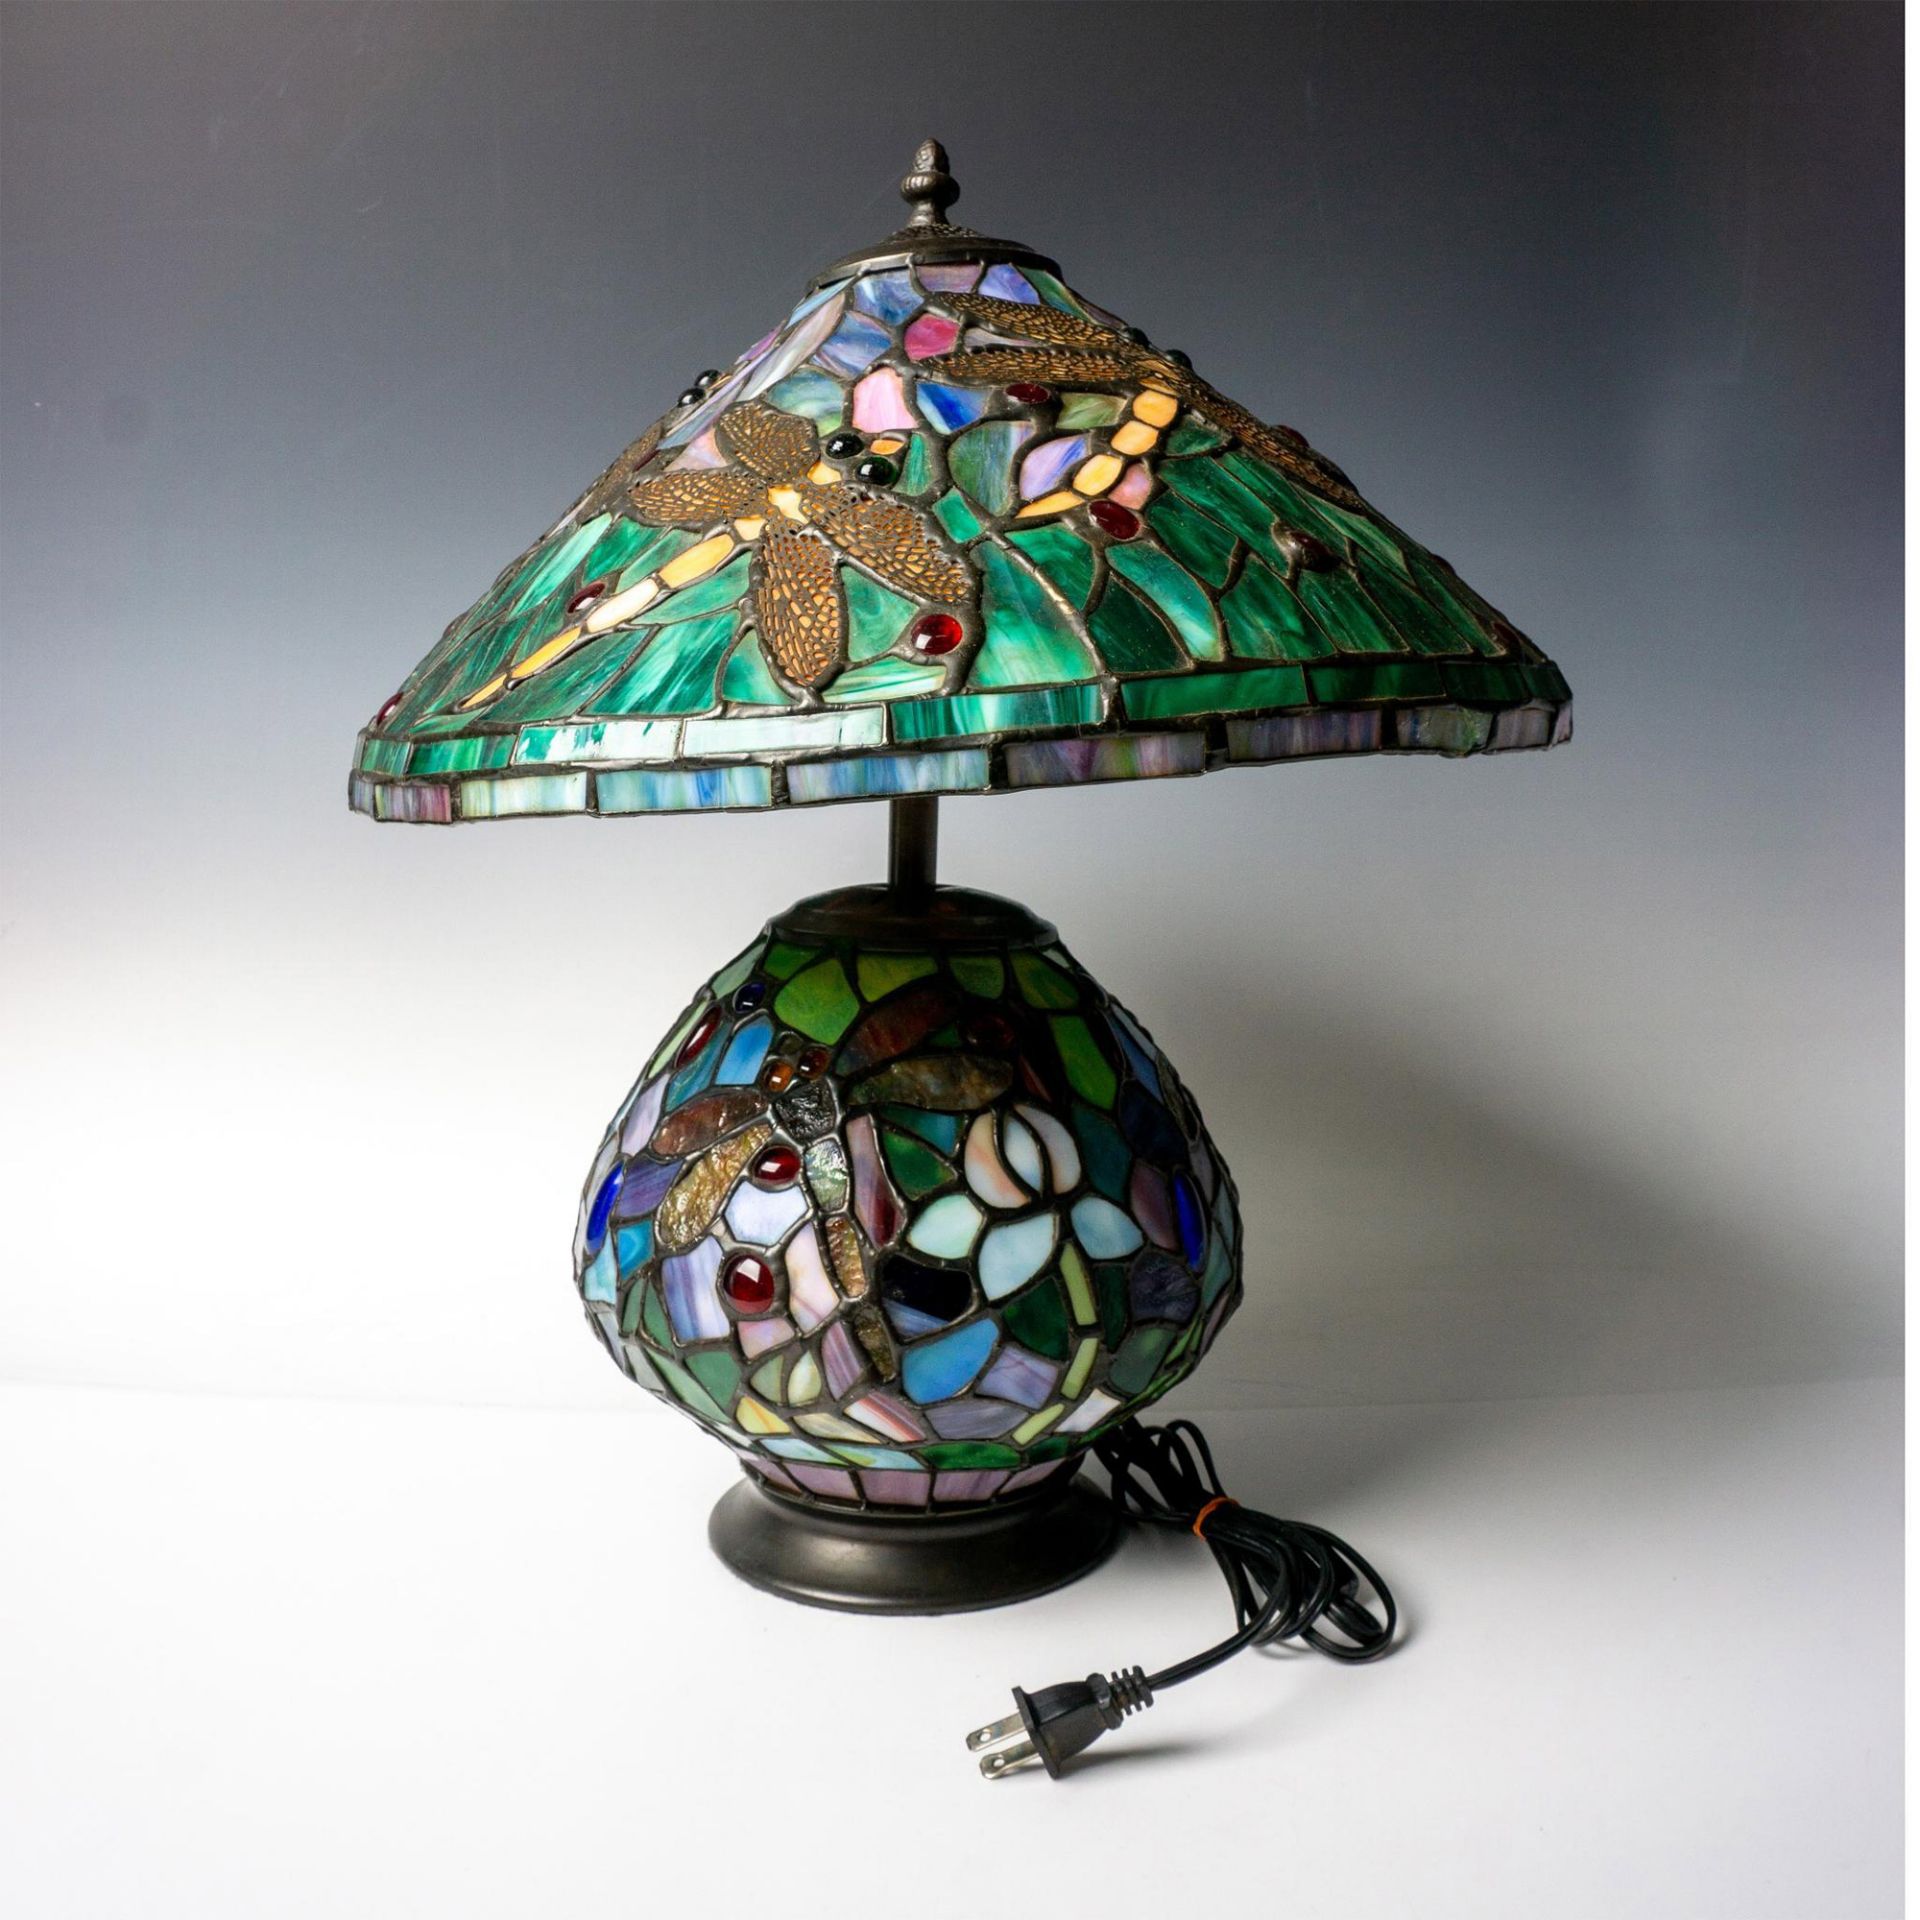 Tiffany Style-Stained Glass Dragonfly Lamp & Shade - Image 2 of 5